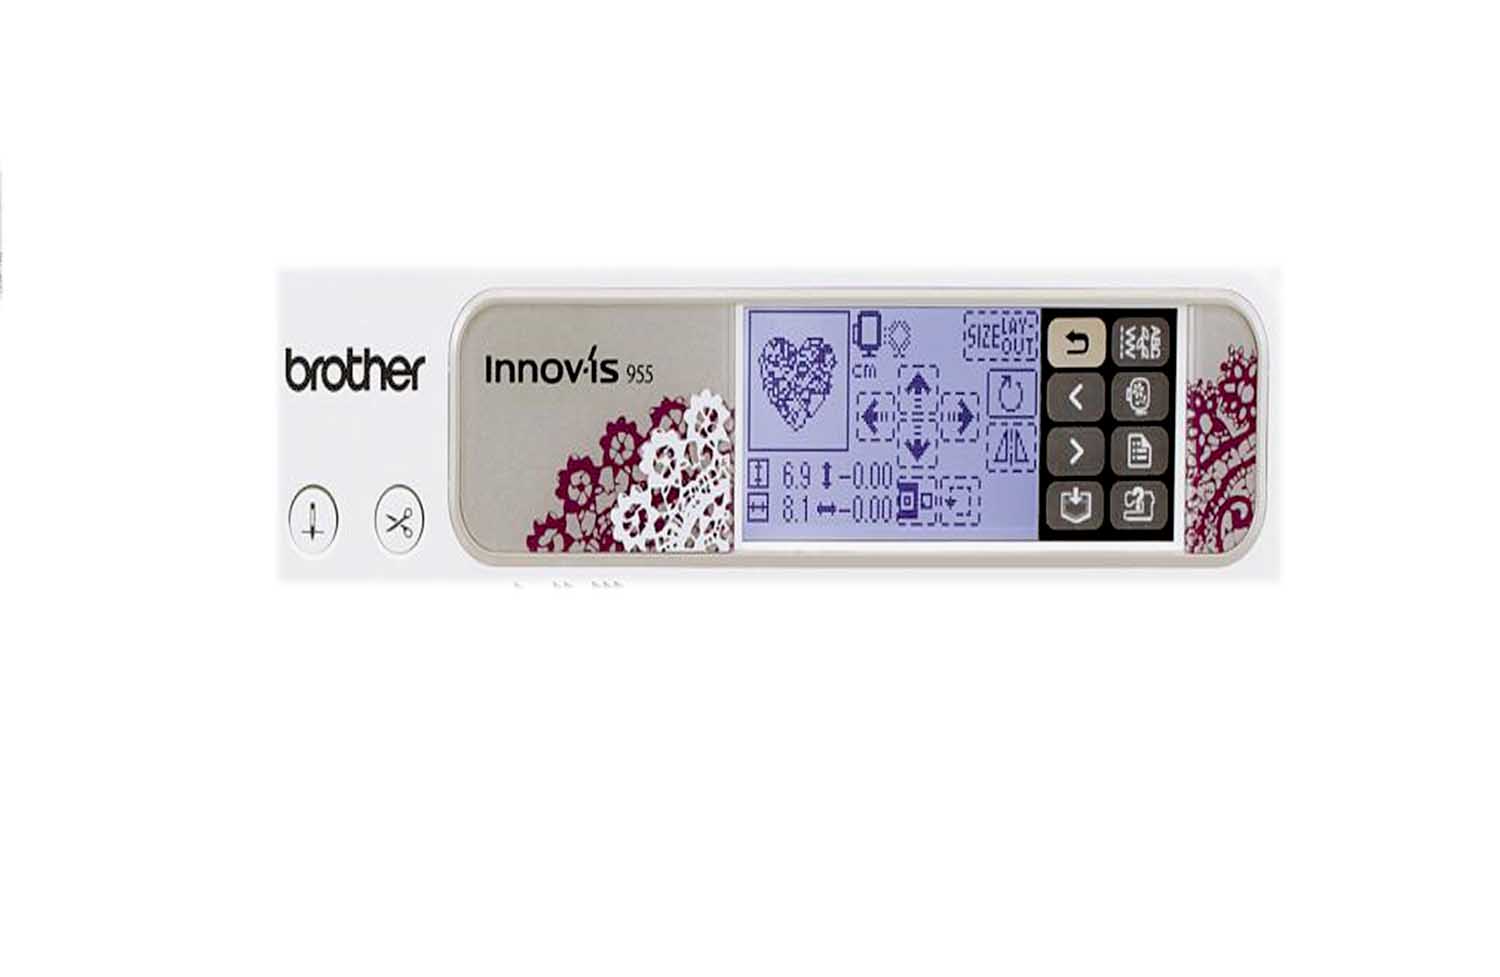 brother-innov-is-955-computer